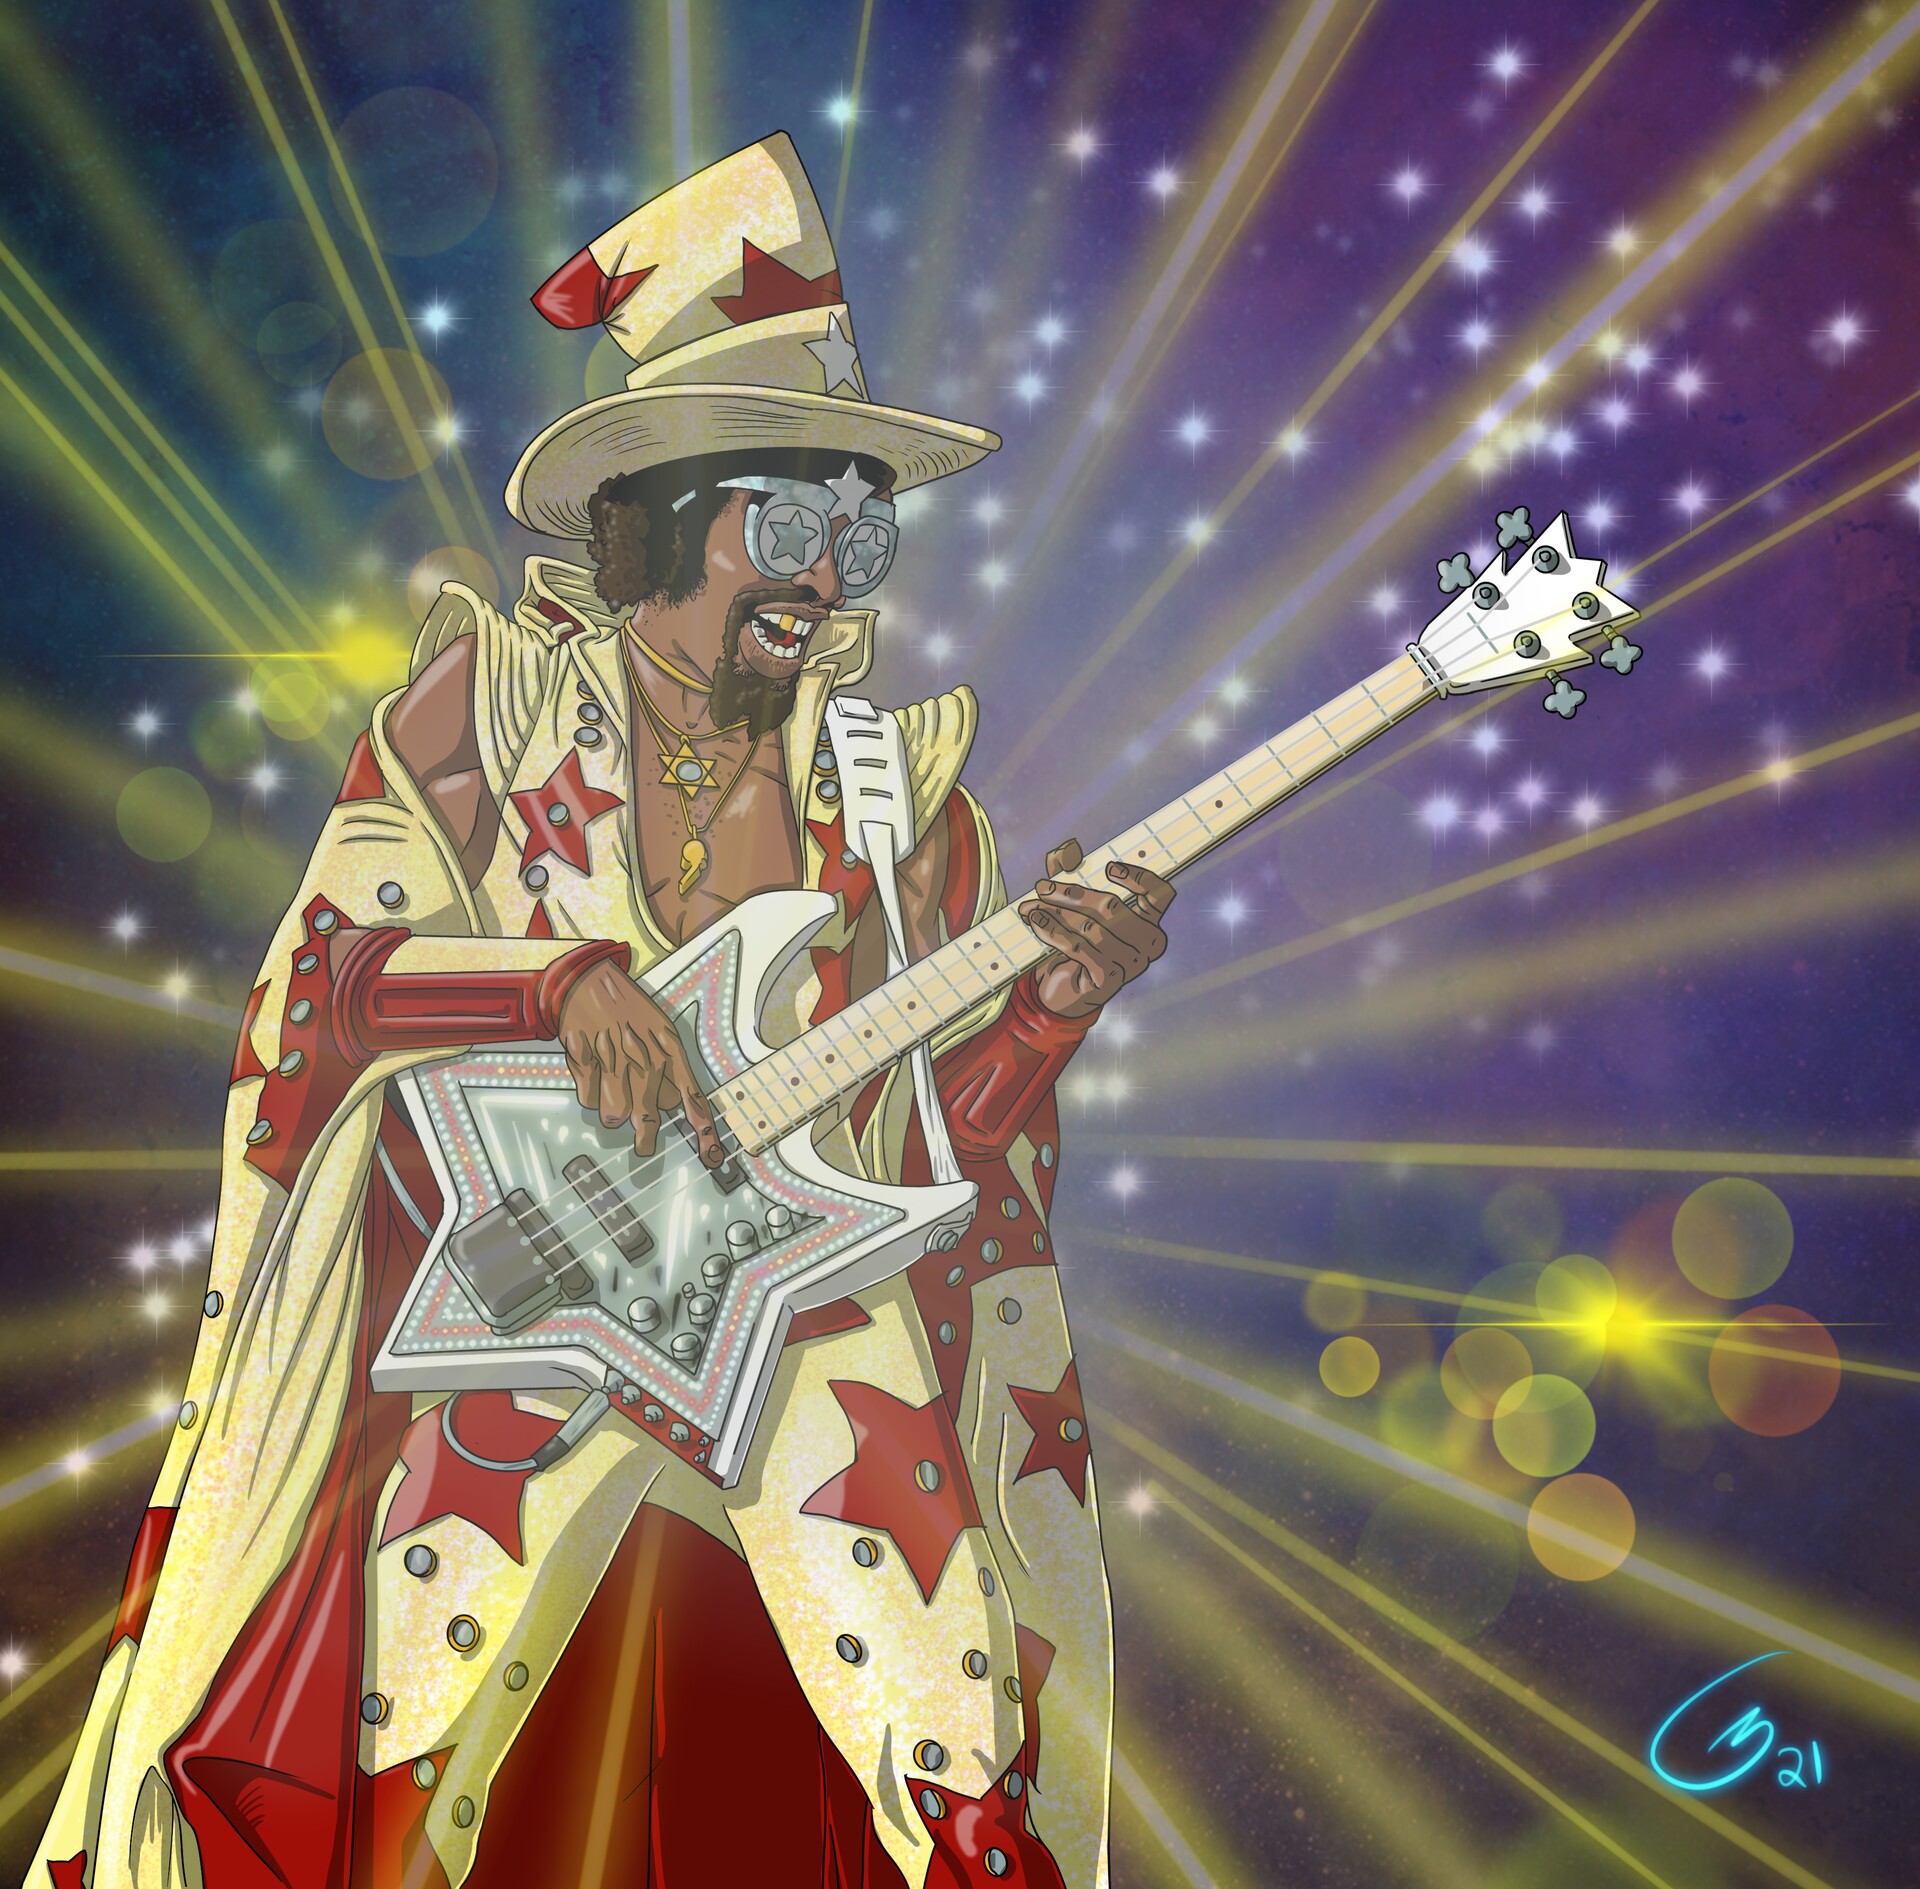 Bootsy Collins.